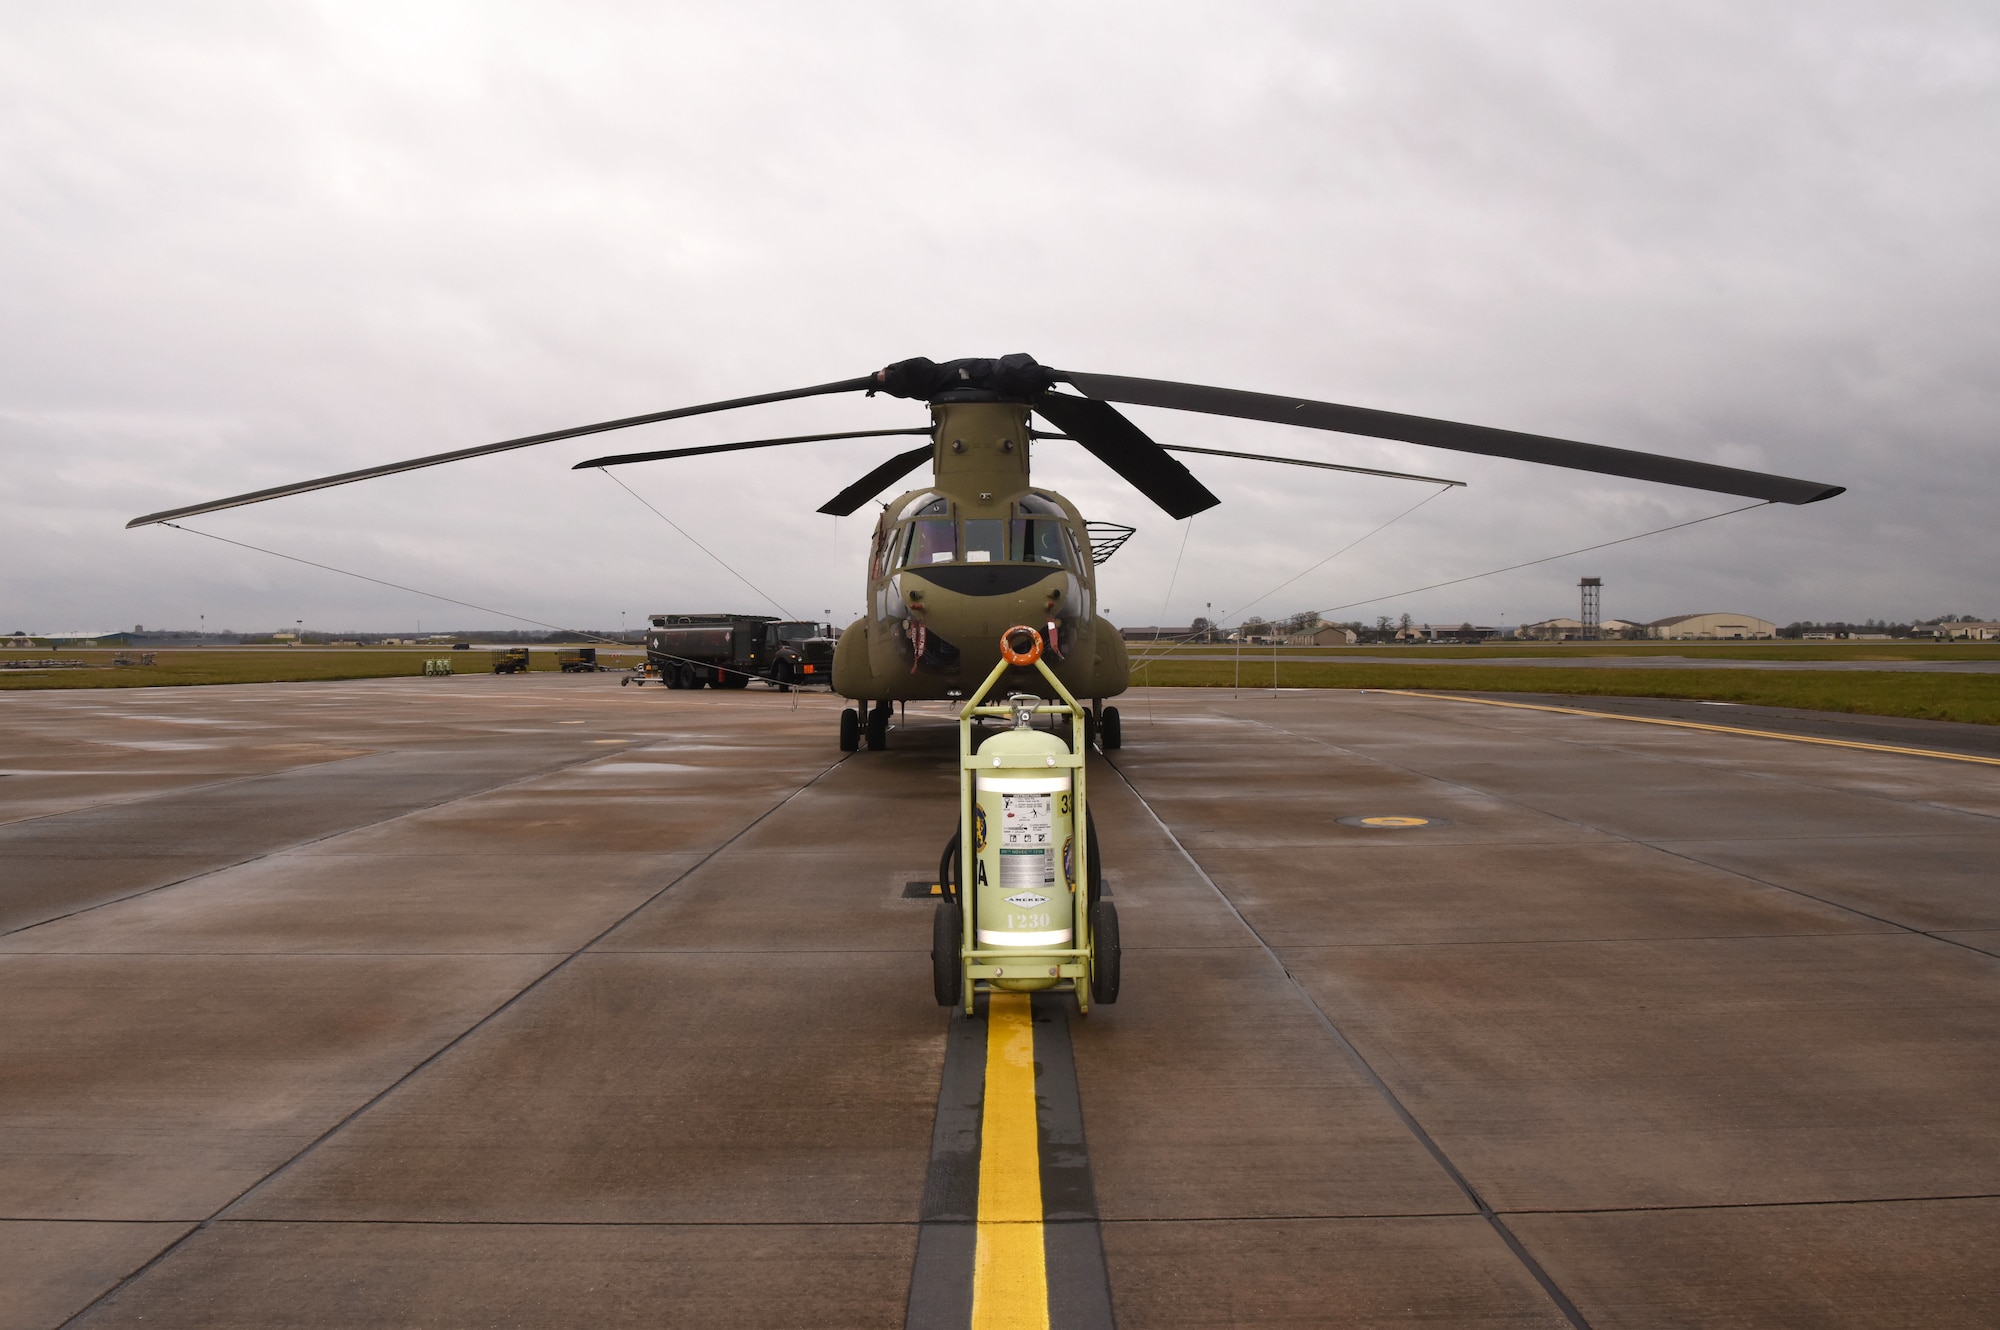 A U.S. Army CH-47F Chinook helicopter from the 1st Battalion, 214th Aviation Regiment (General Support Aviation Battalion), 12th Combat Aviation Brigade, Wiesbaden, Germany, sits on the flightline at Royal Air Force Mildenhall, England, March 16, 2023. The 12 CAB is among other units assigned to V Corps, America's Forward Deployed Corps in Europe. They work alongside NATO Allies and regional security partners to provide combat-ready forces, execute joint and multinational training exercises, and retain command and control for all rotational and assigned units in the European theater. (U.S. Air Force photo by Karen Abeyasekere)